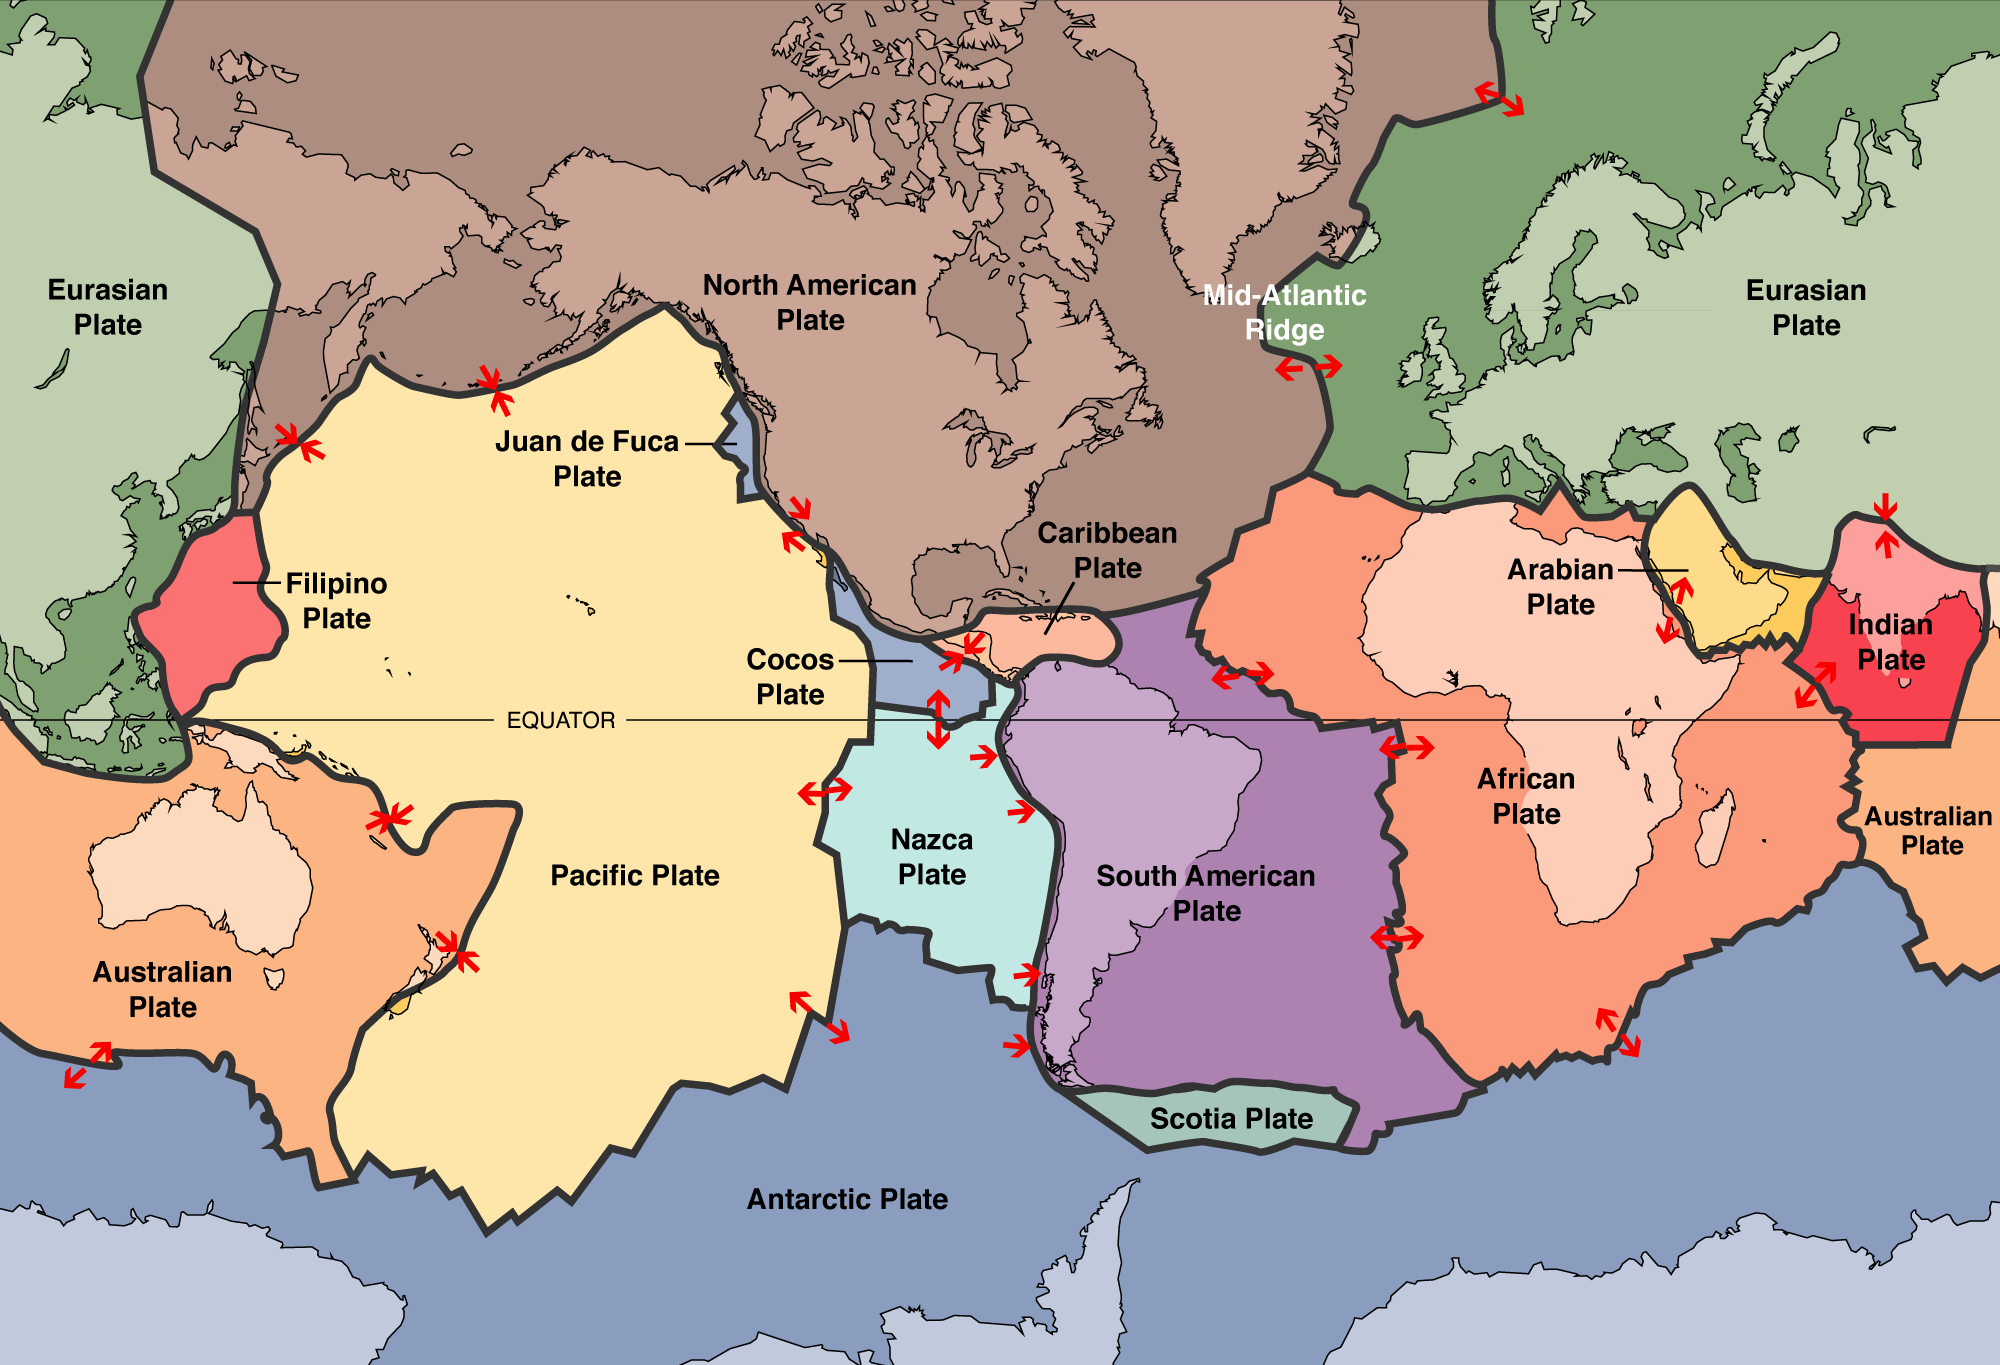 World map with plate boundaries illustrated. Each plate as well as the mid-Atlantic Ridge is labelled.